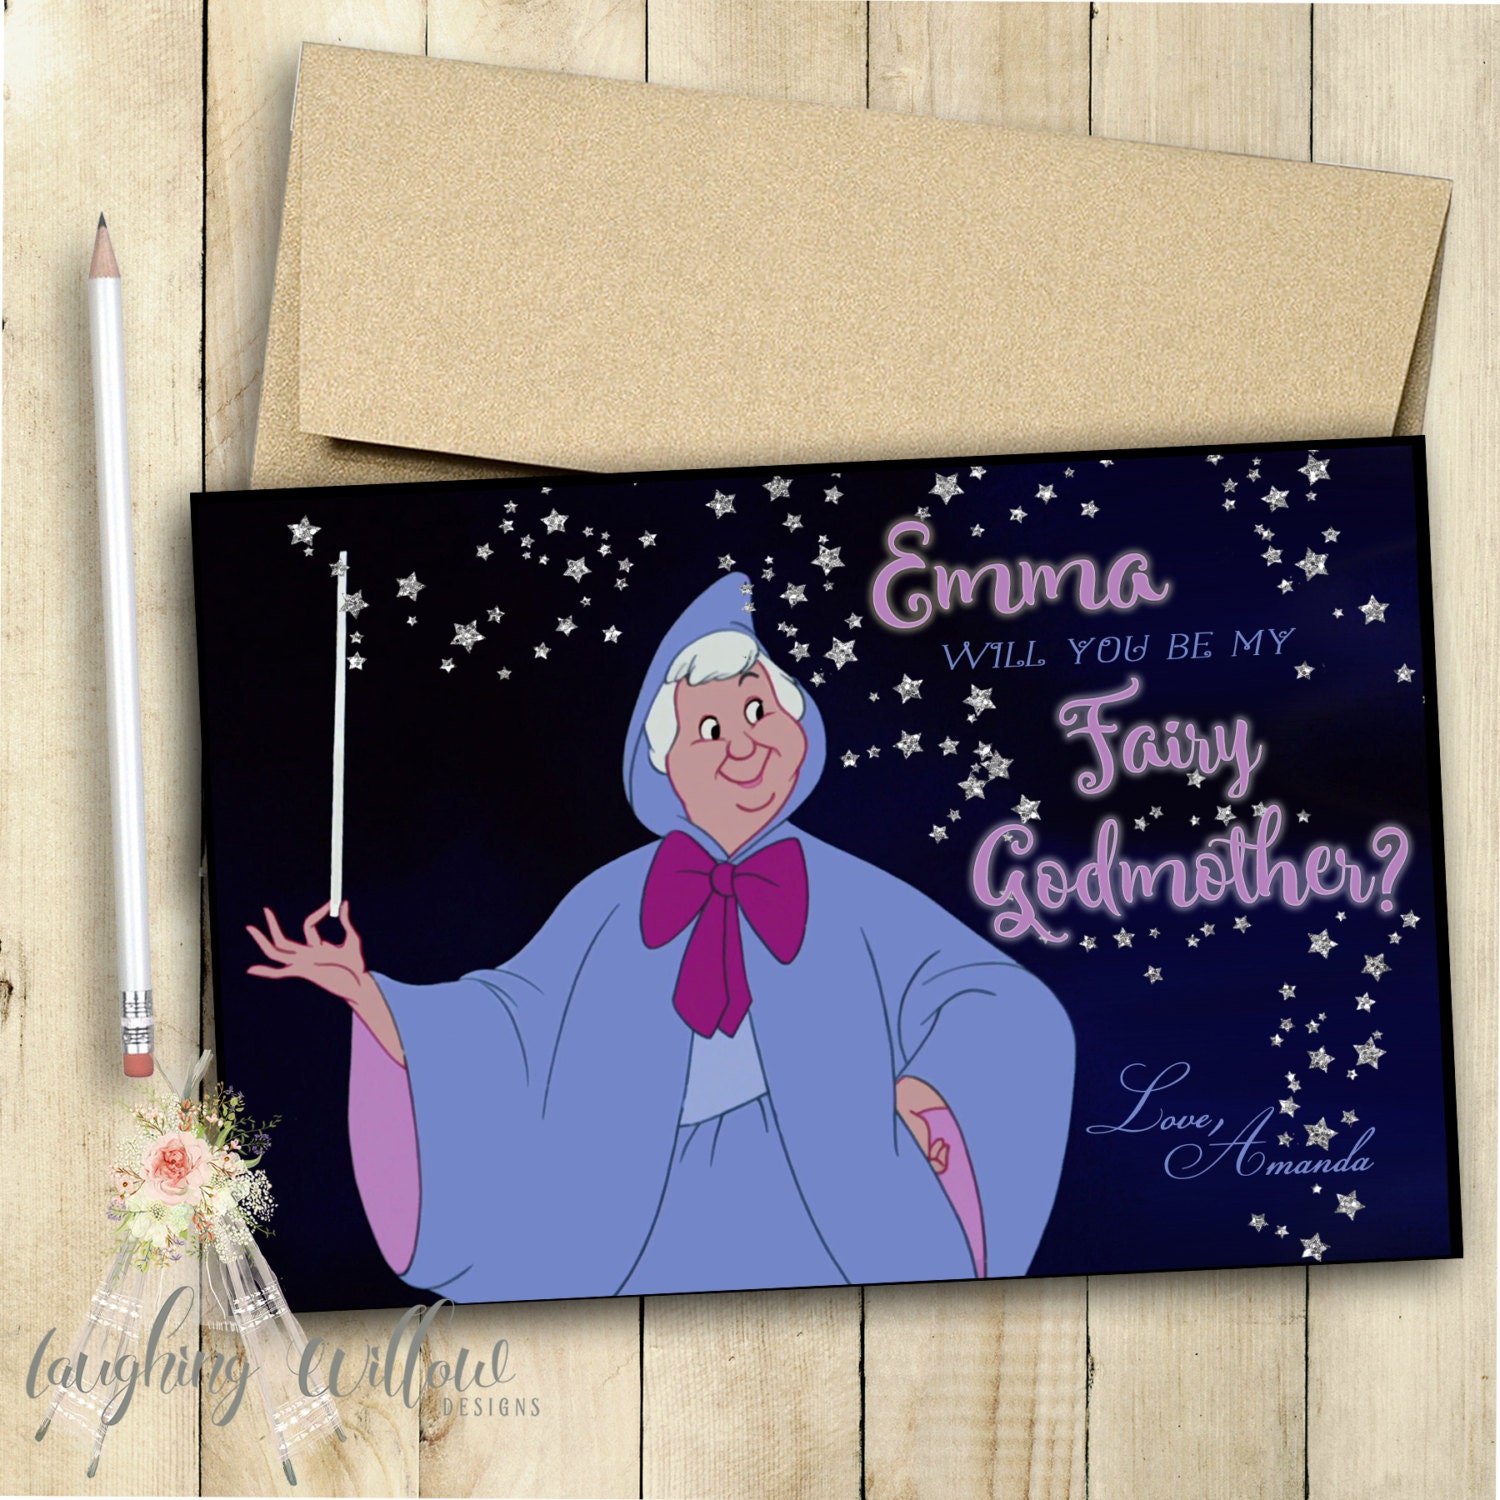 godmother-card-fairy-godmother-card-will-you-be-my-godmother